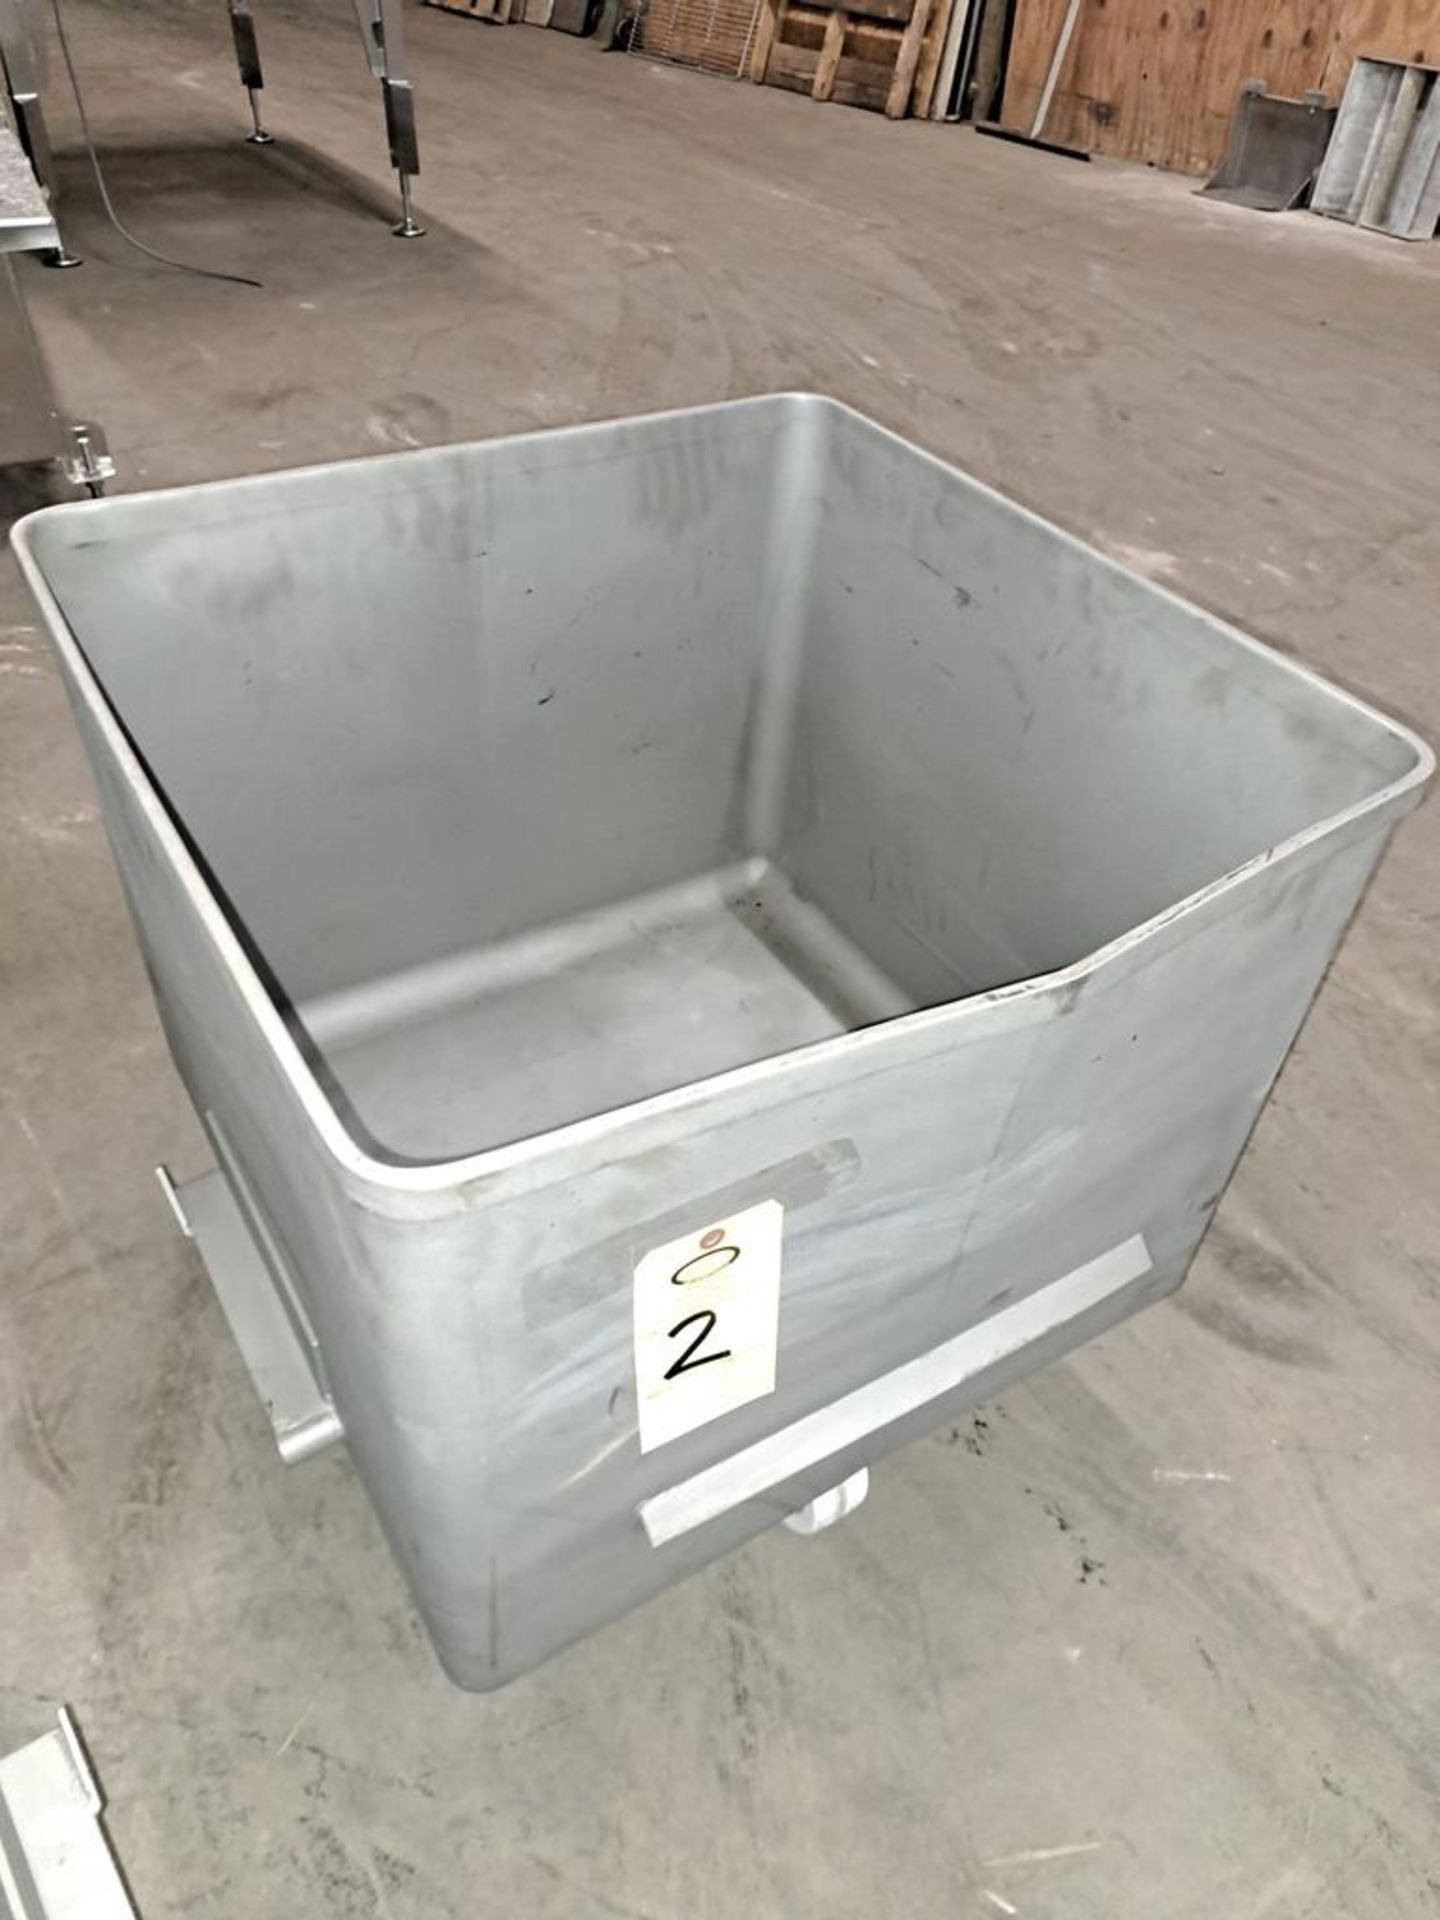 Stainless Steel Dump Buggy, 400 Lb. capacity, Located In Sandwich, IL (Required Loading Fee: $10.00)